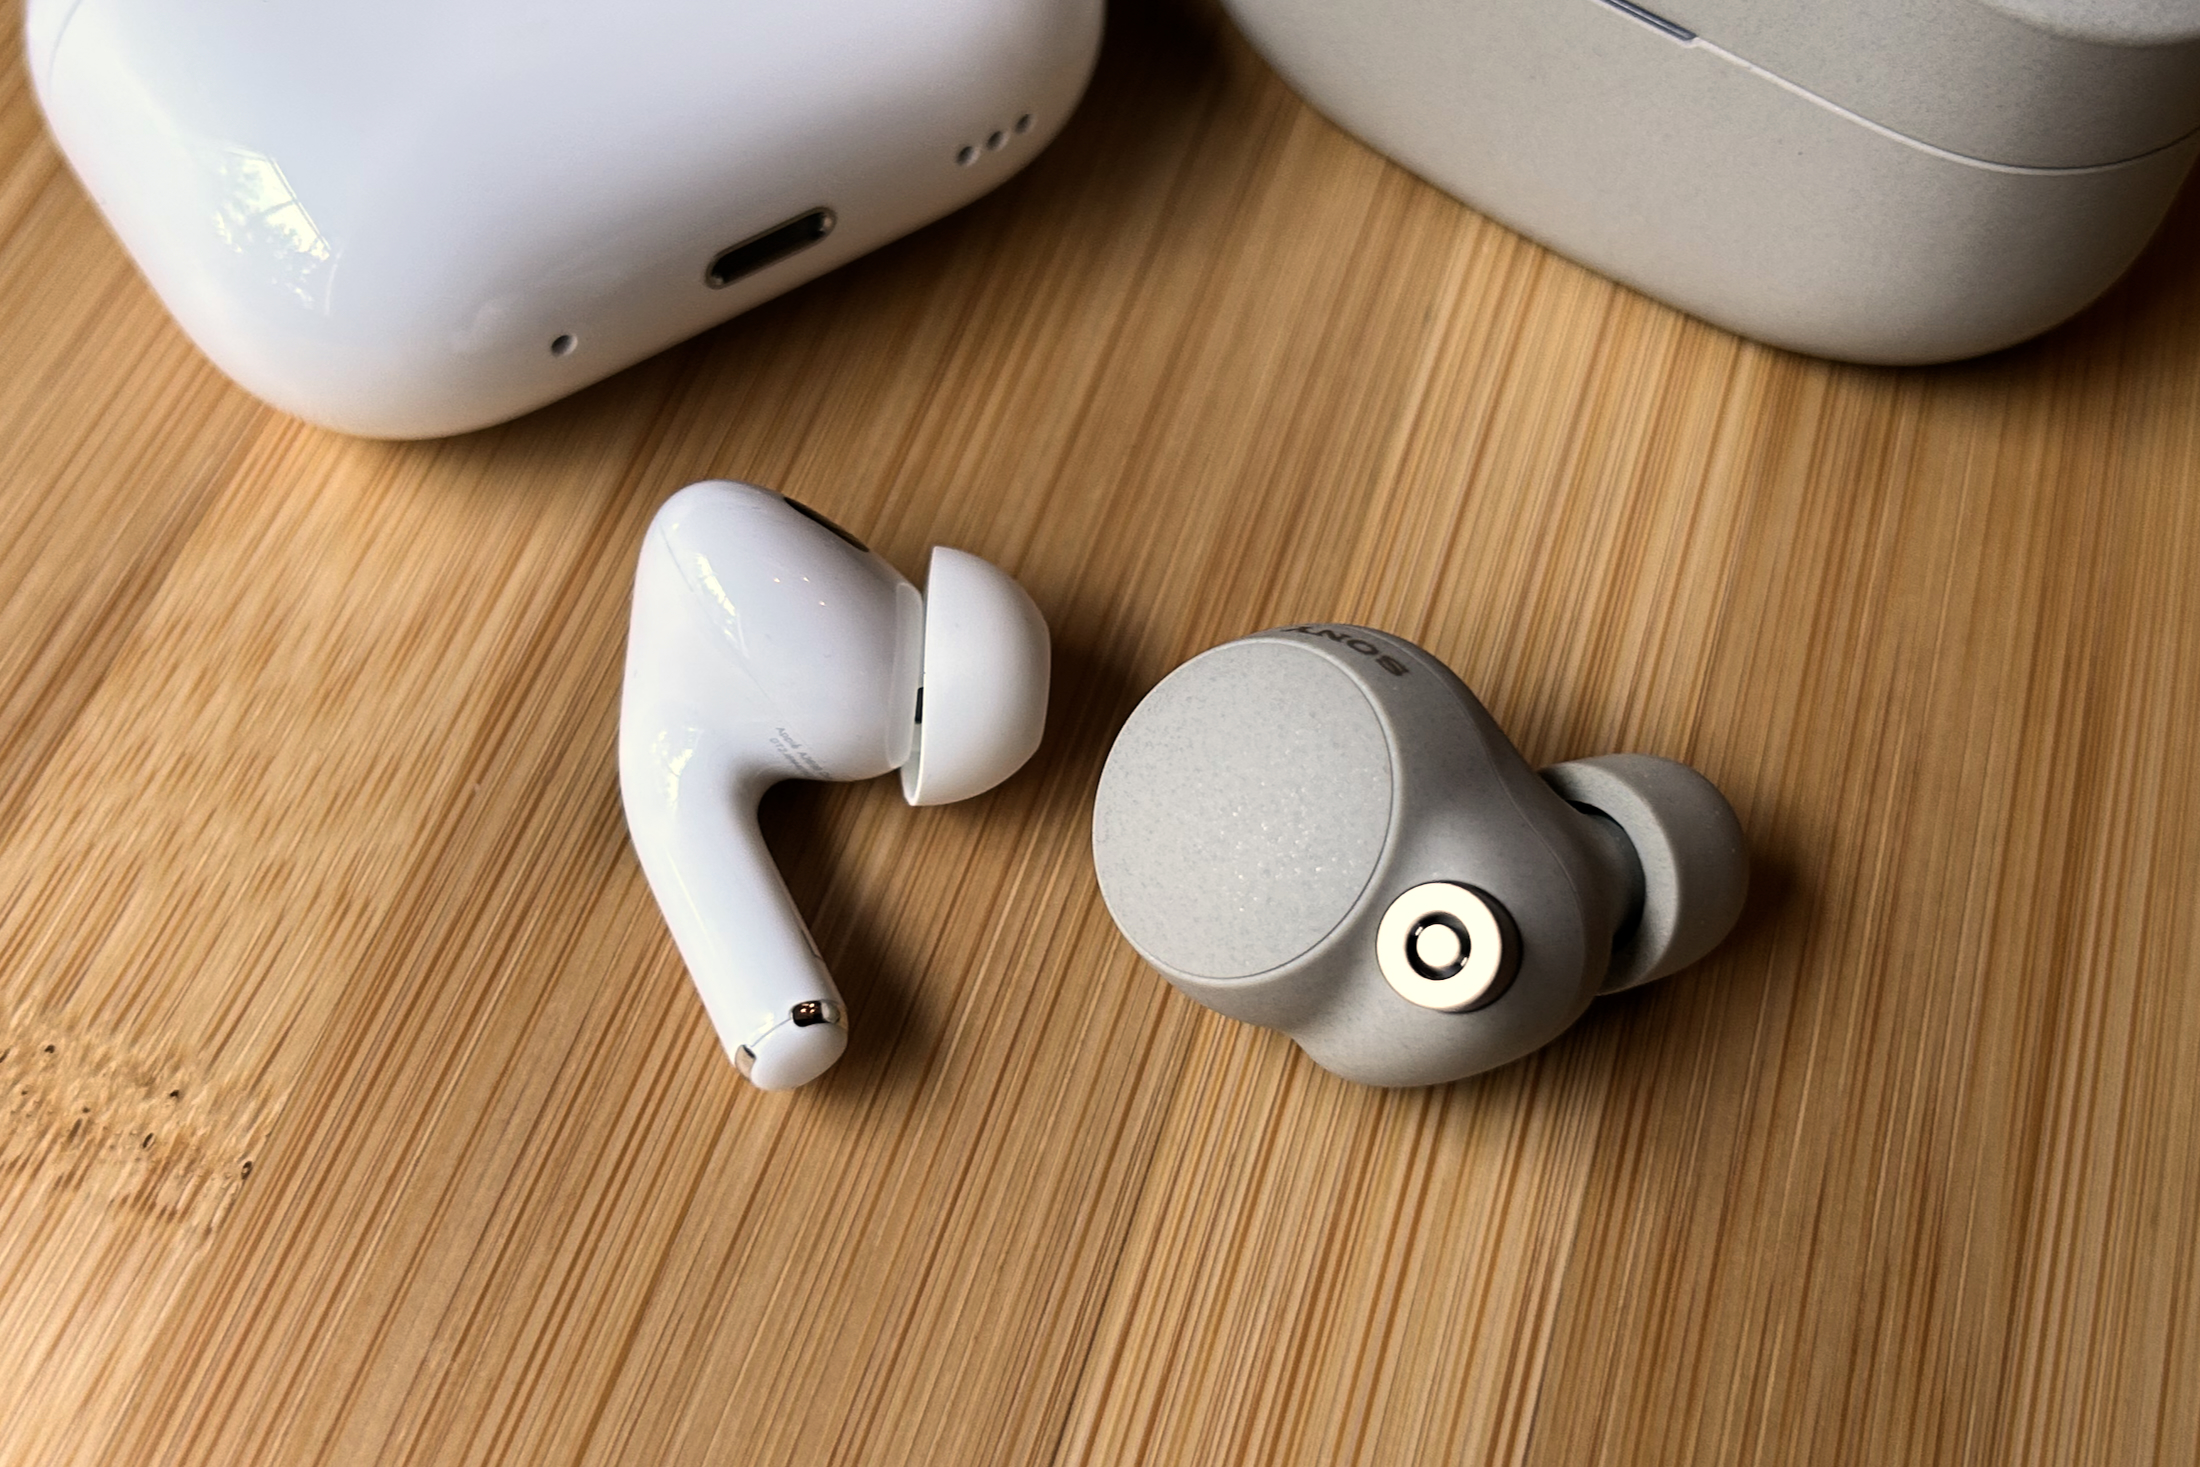 Don't Say AirPods 3: Apple Reveals AirPods Pro, with Active  Noise-Cancelation And Great New Design